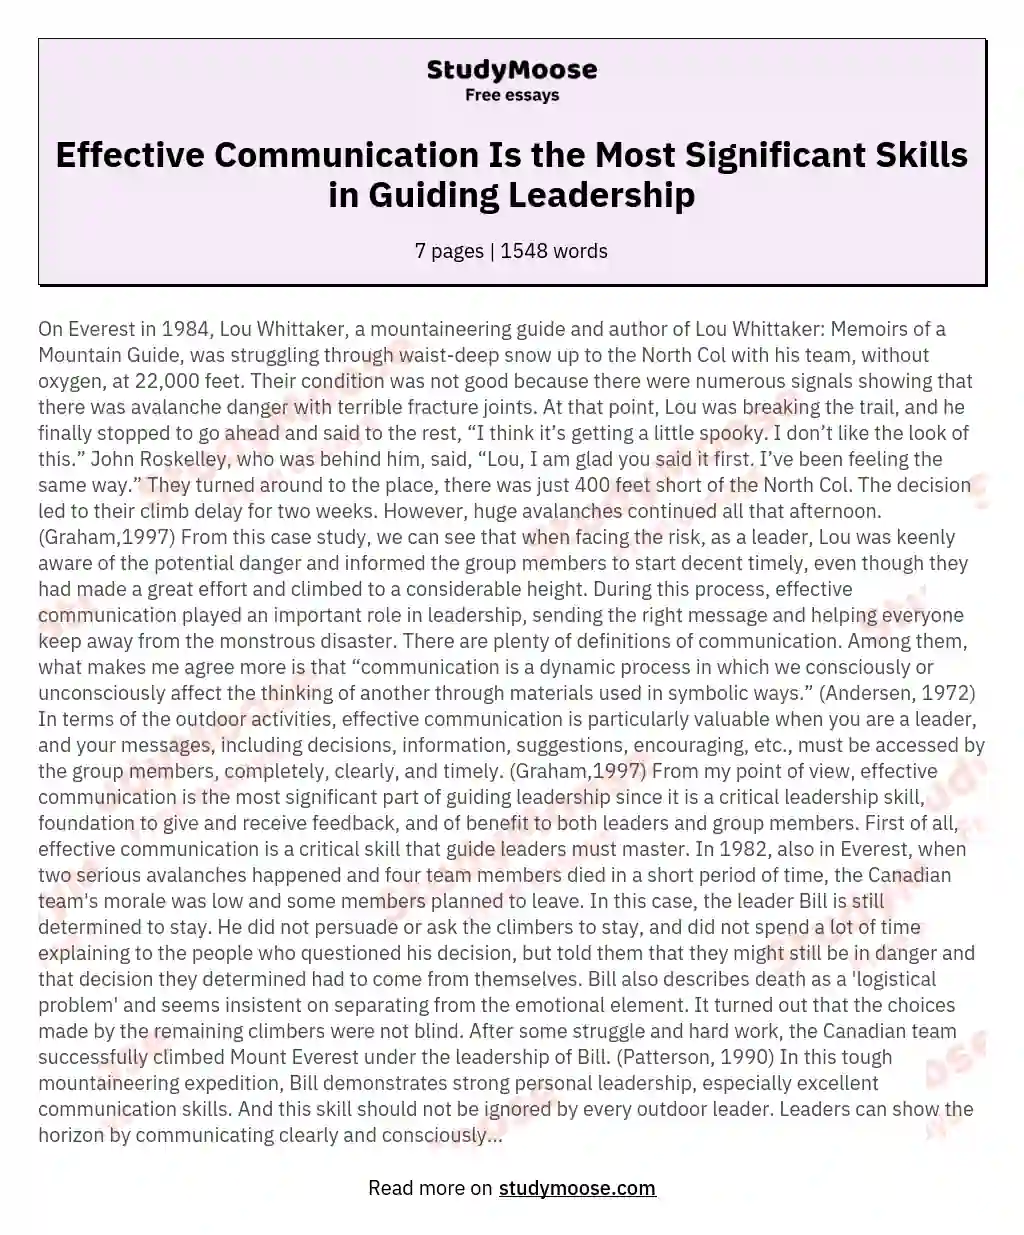 Effective Communication Is the Most Significant Skills in Guiding Leadership essay